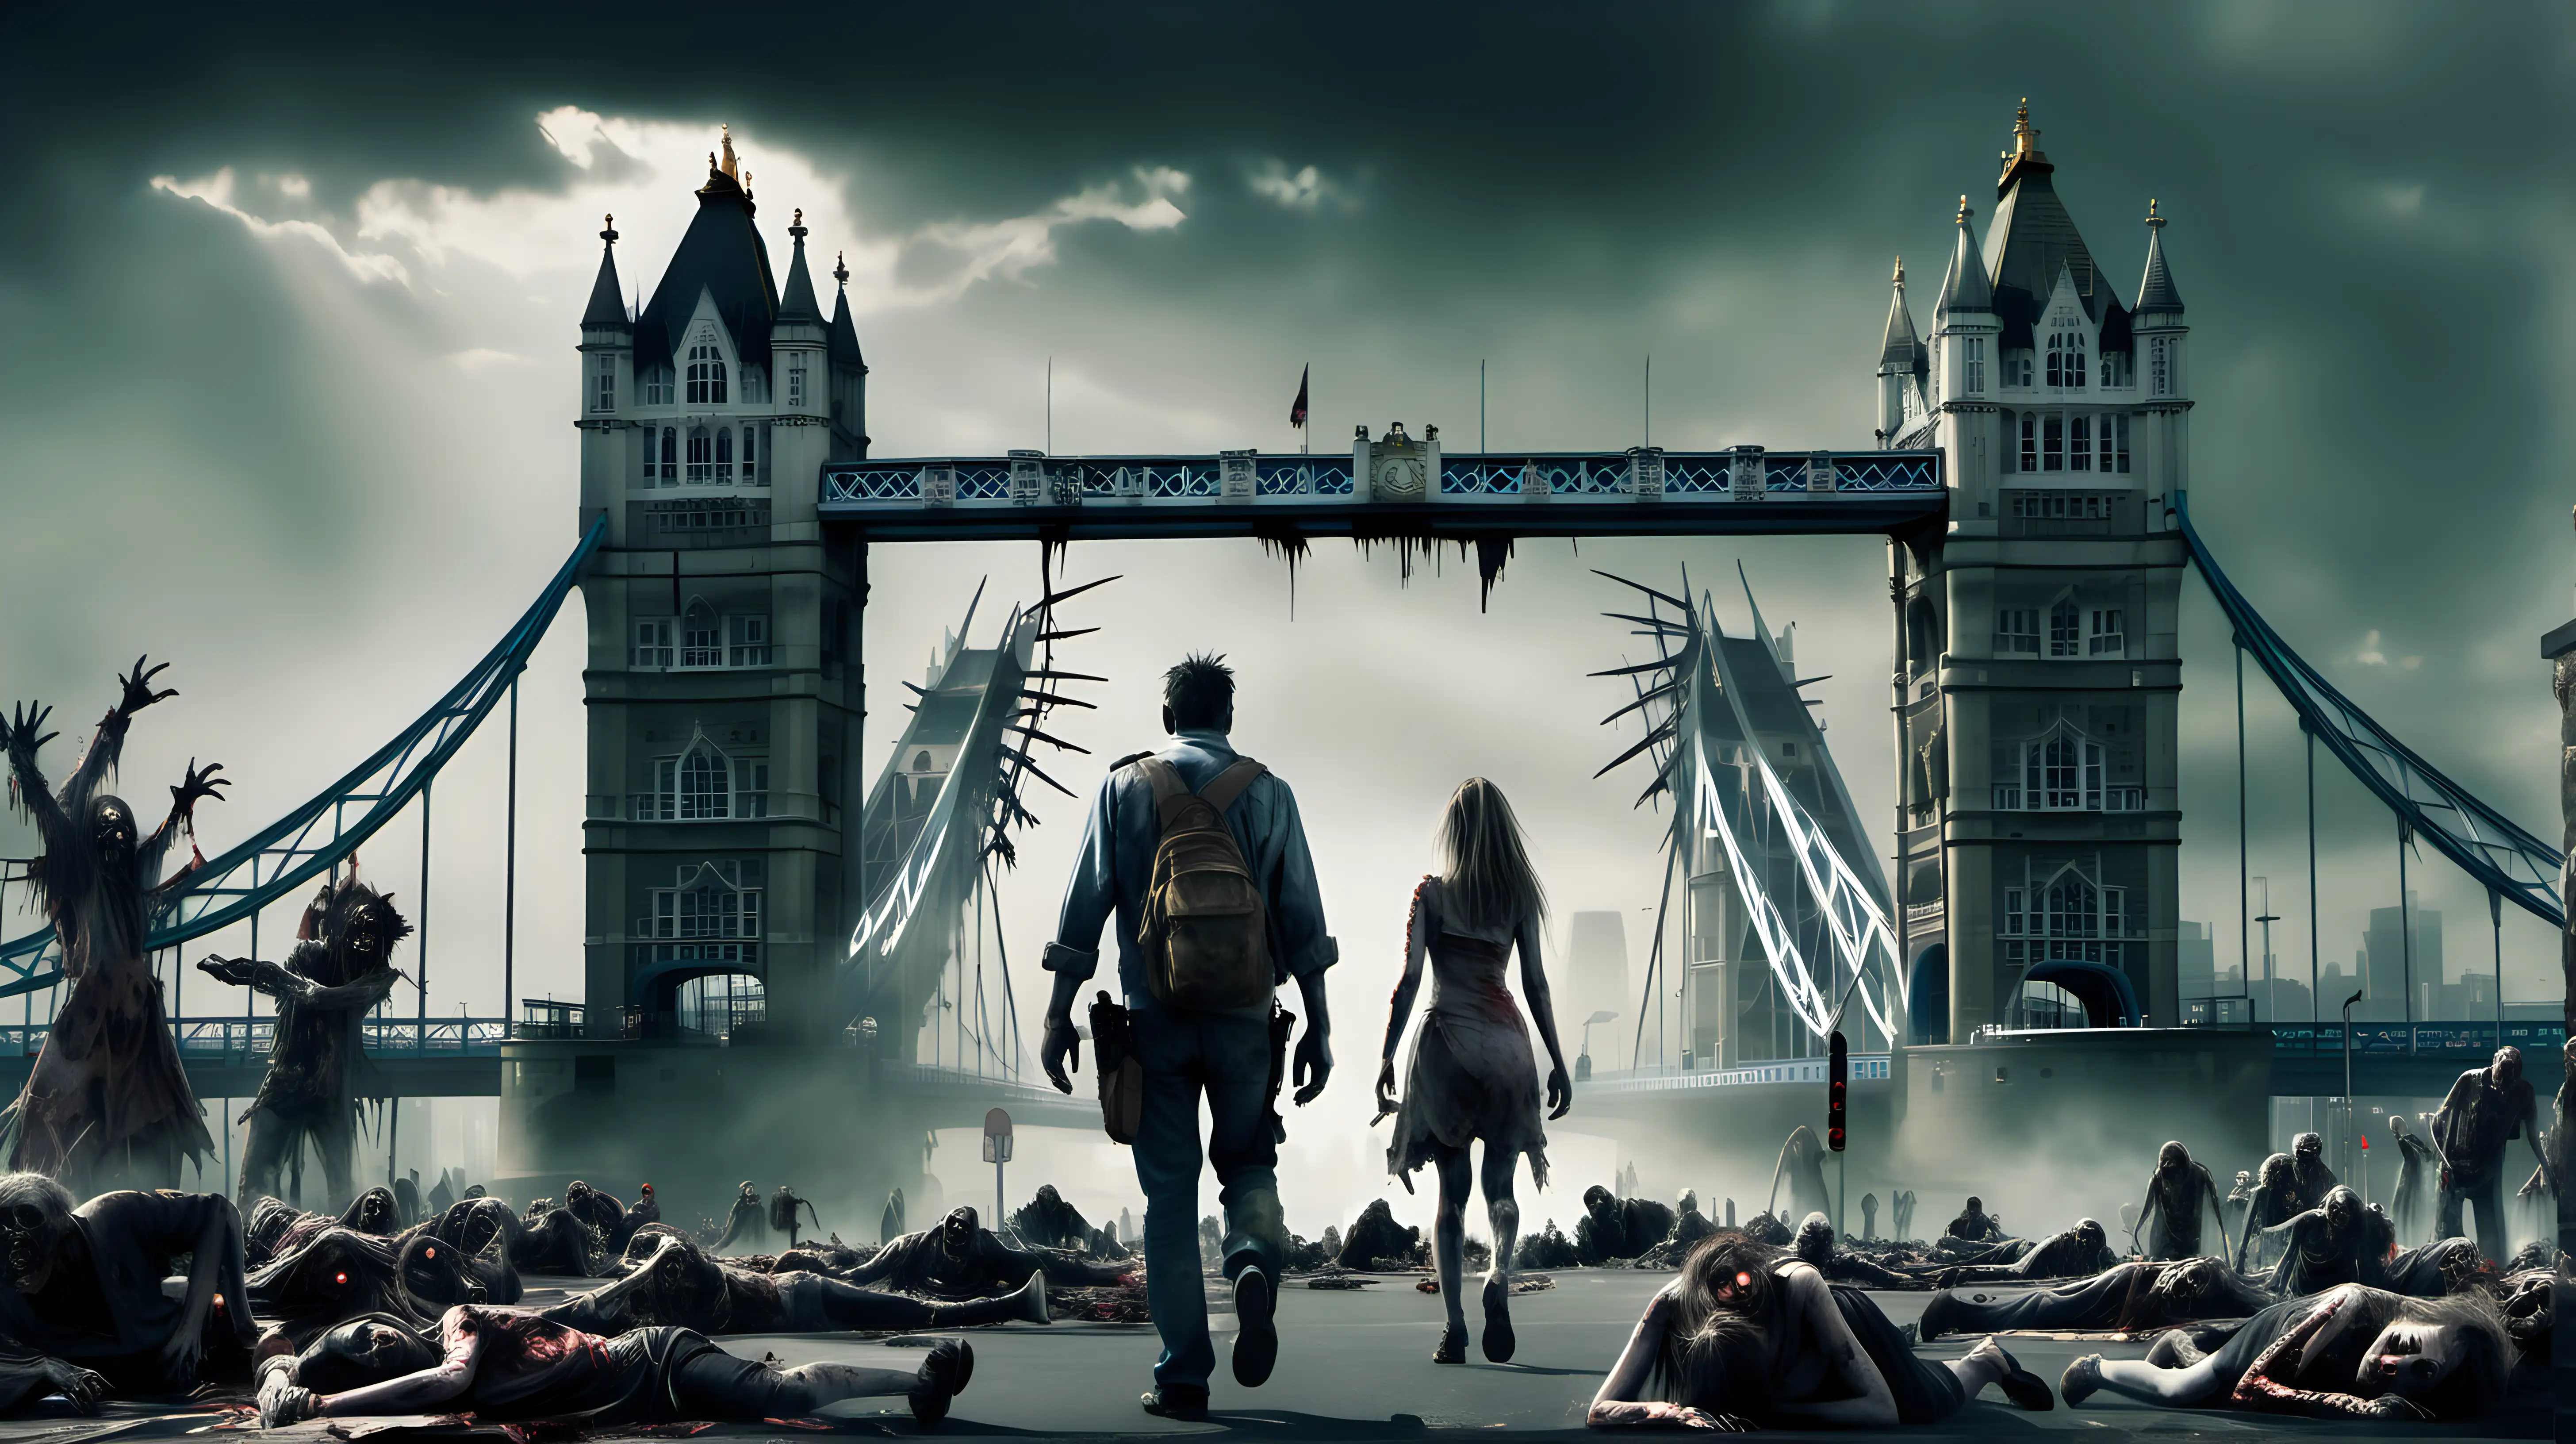 zombies, Tower Bridge in London from a distance, male and female zombies, post-apocalyptic landscape